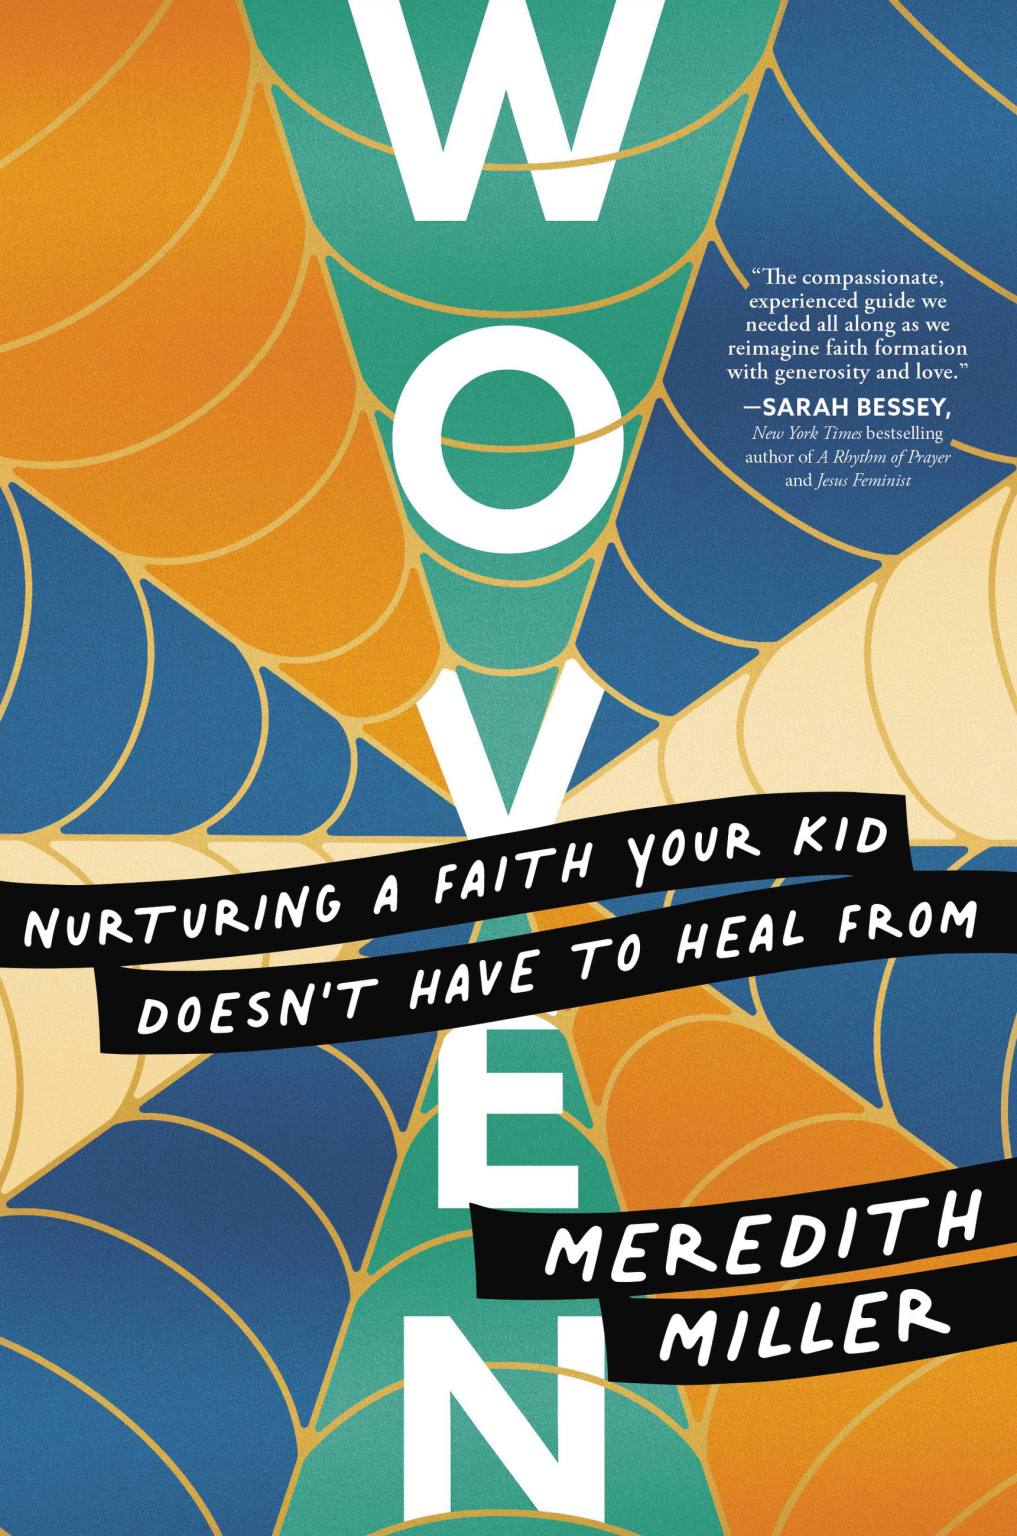 Book Review: “Woven: Nurturing a Faith Your Kid Doesn’t Have to Heal From” by Meredith Miller